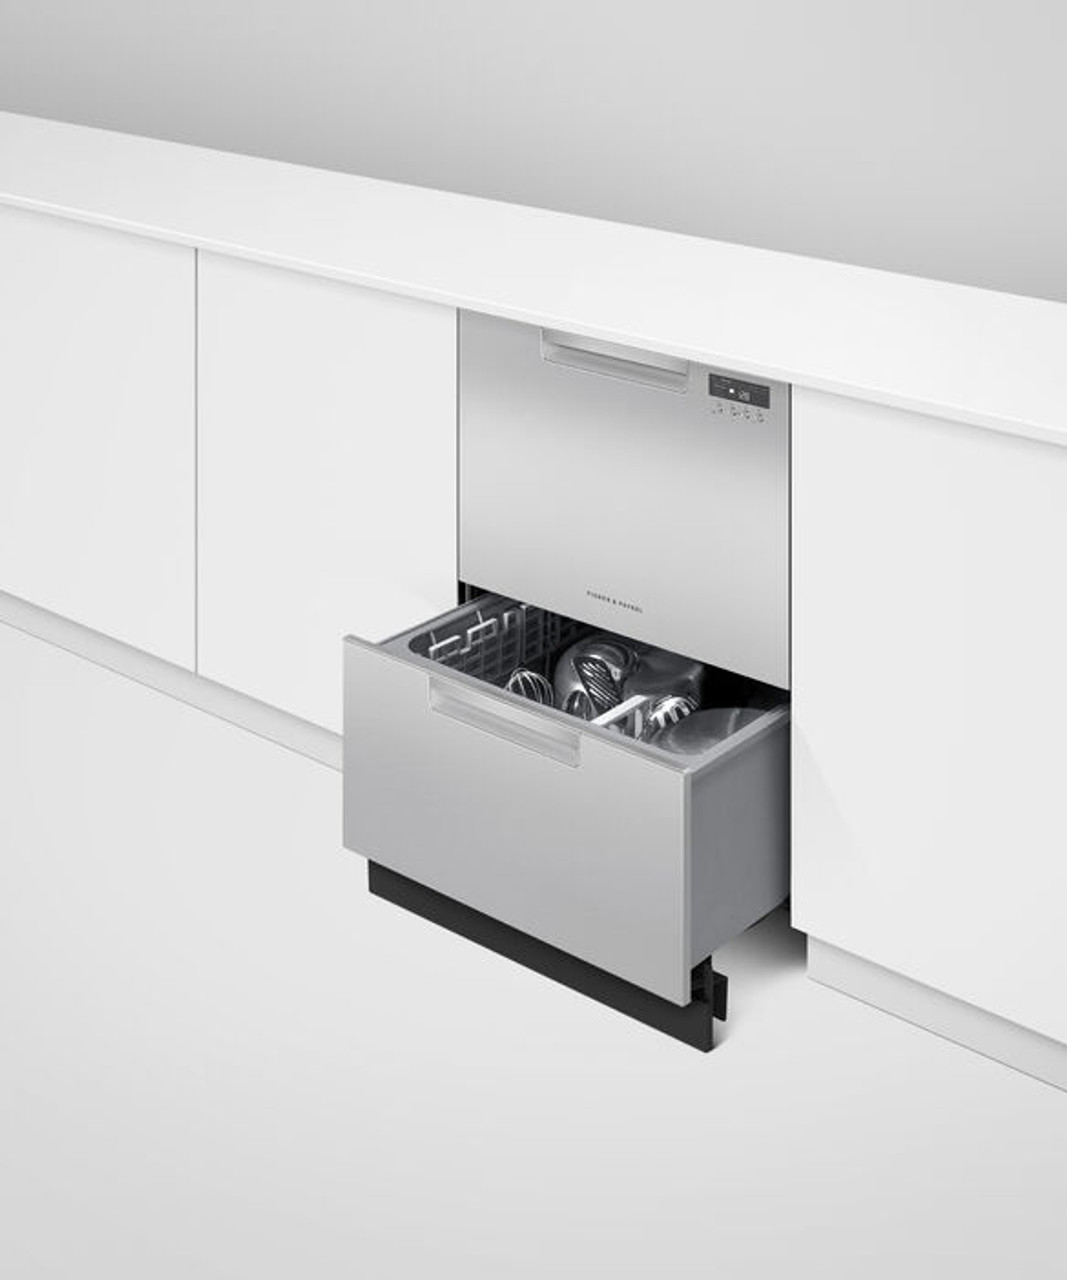 How Fisher & Paykel Dishwashers Are Simplifying Kitchen Design